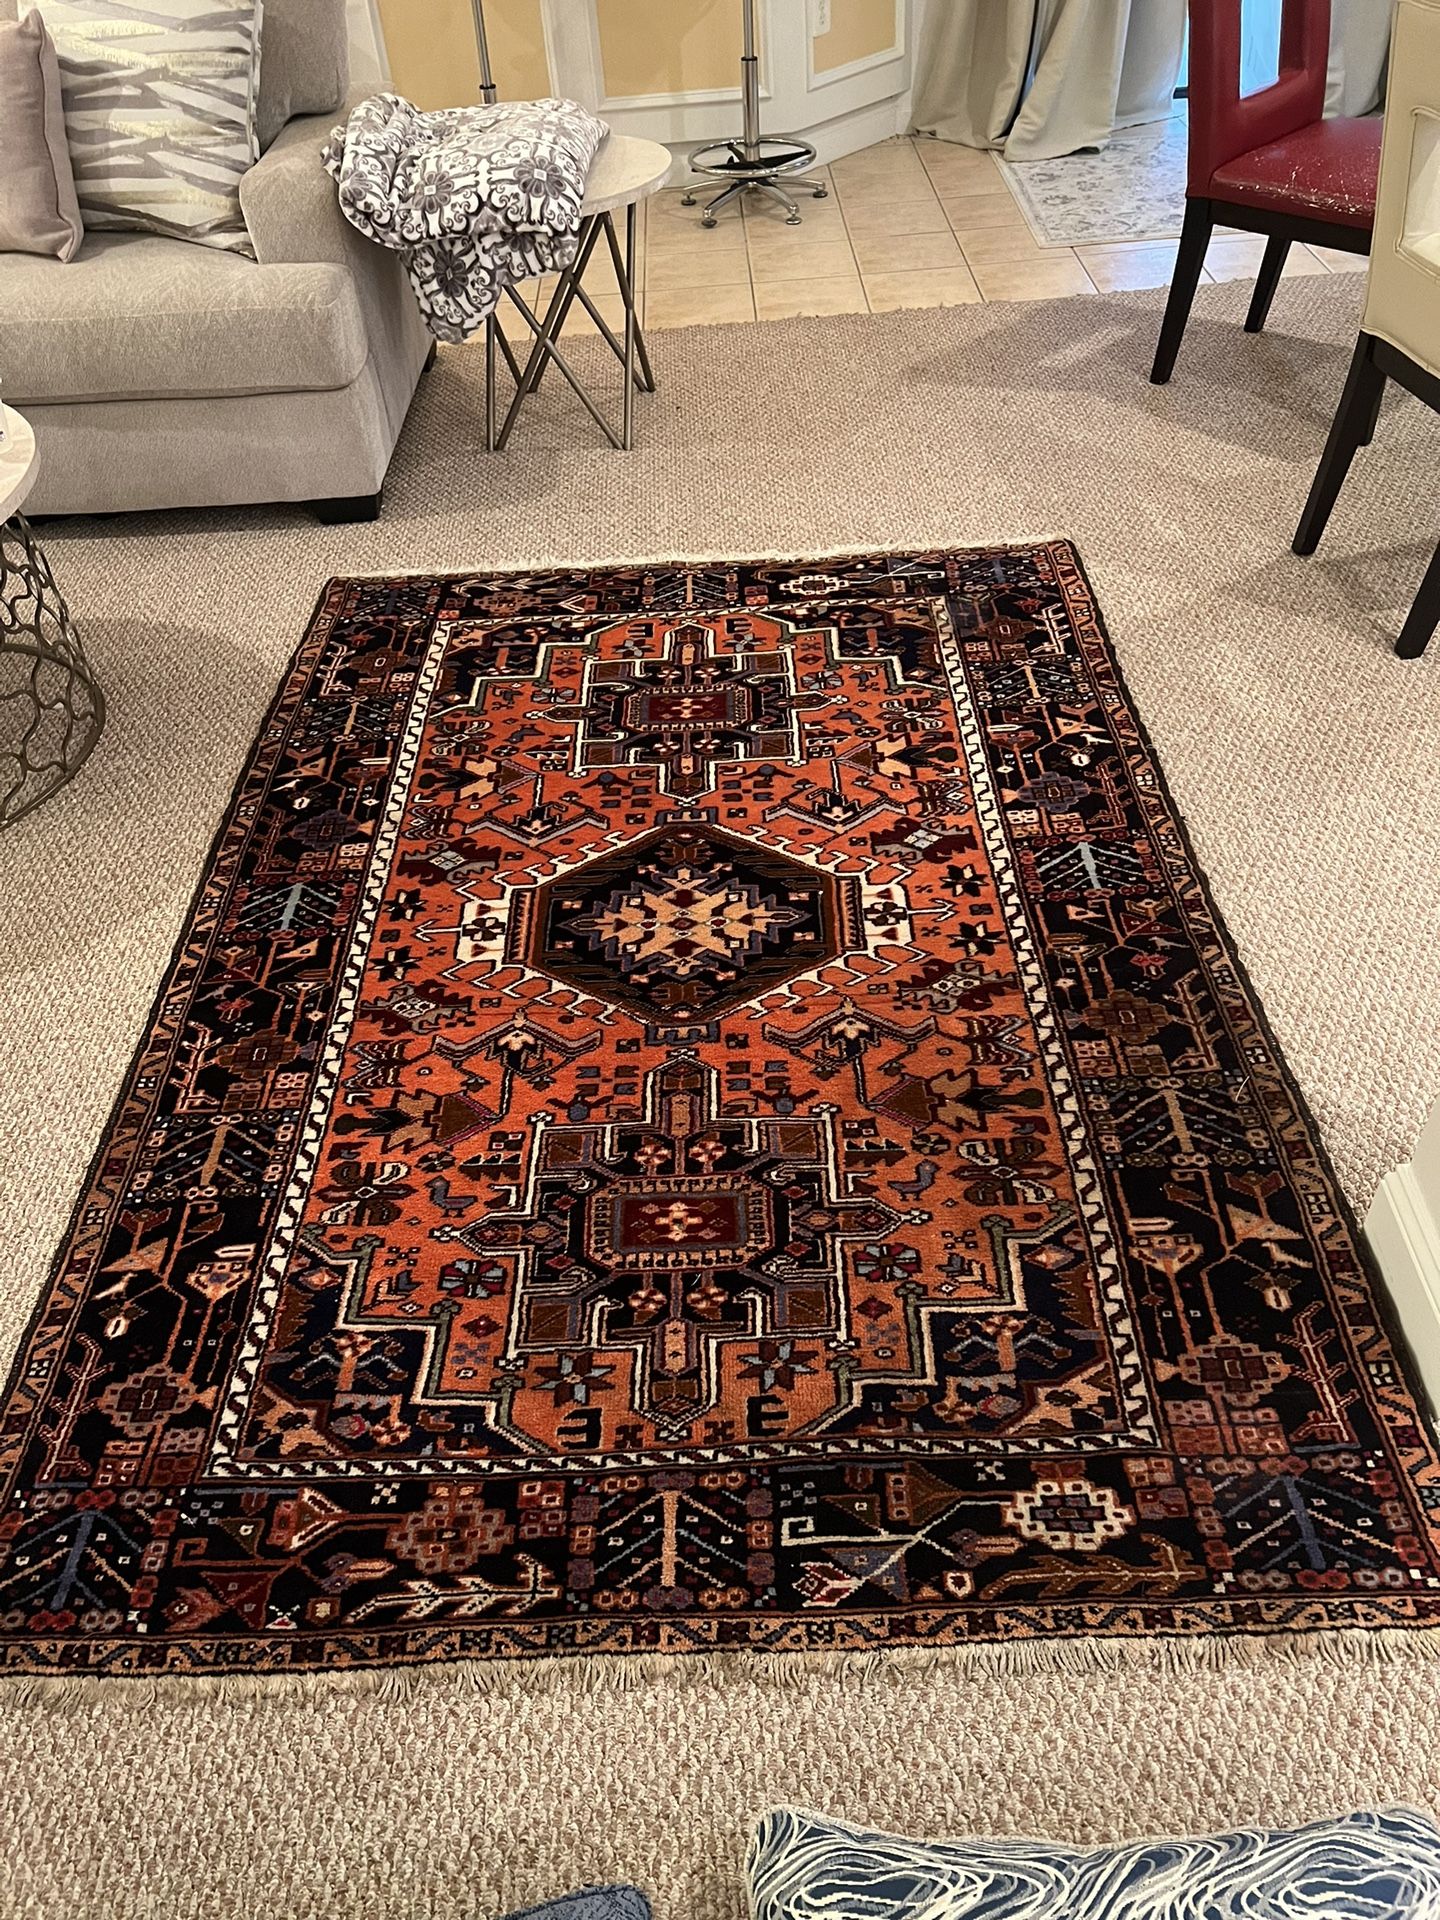 authentic Persian rugs